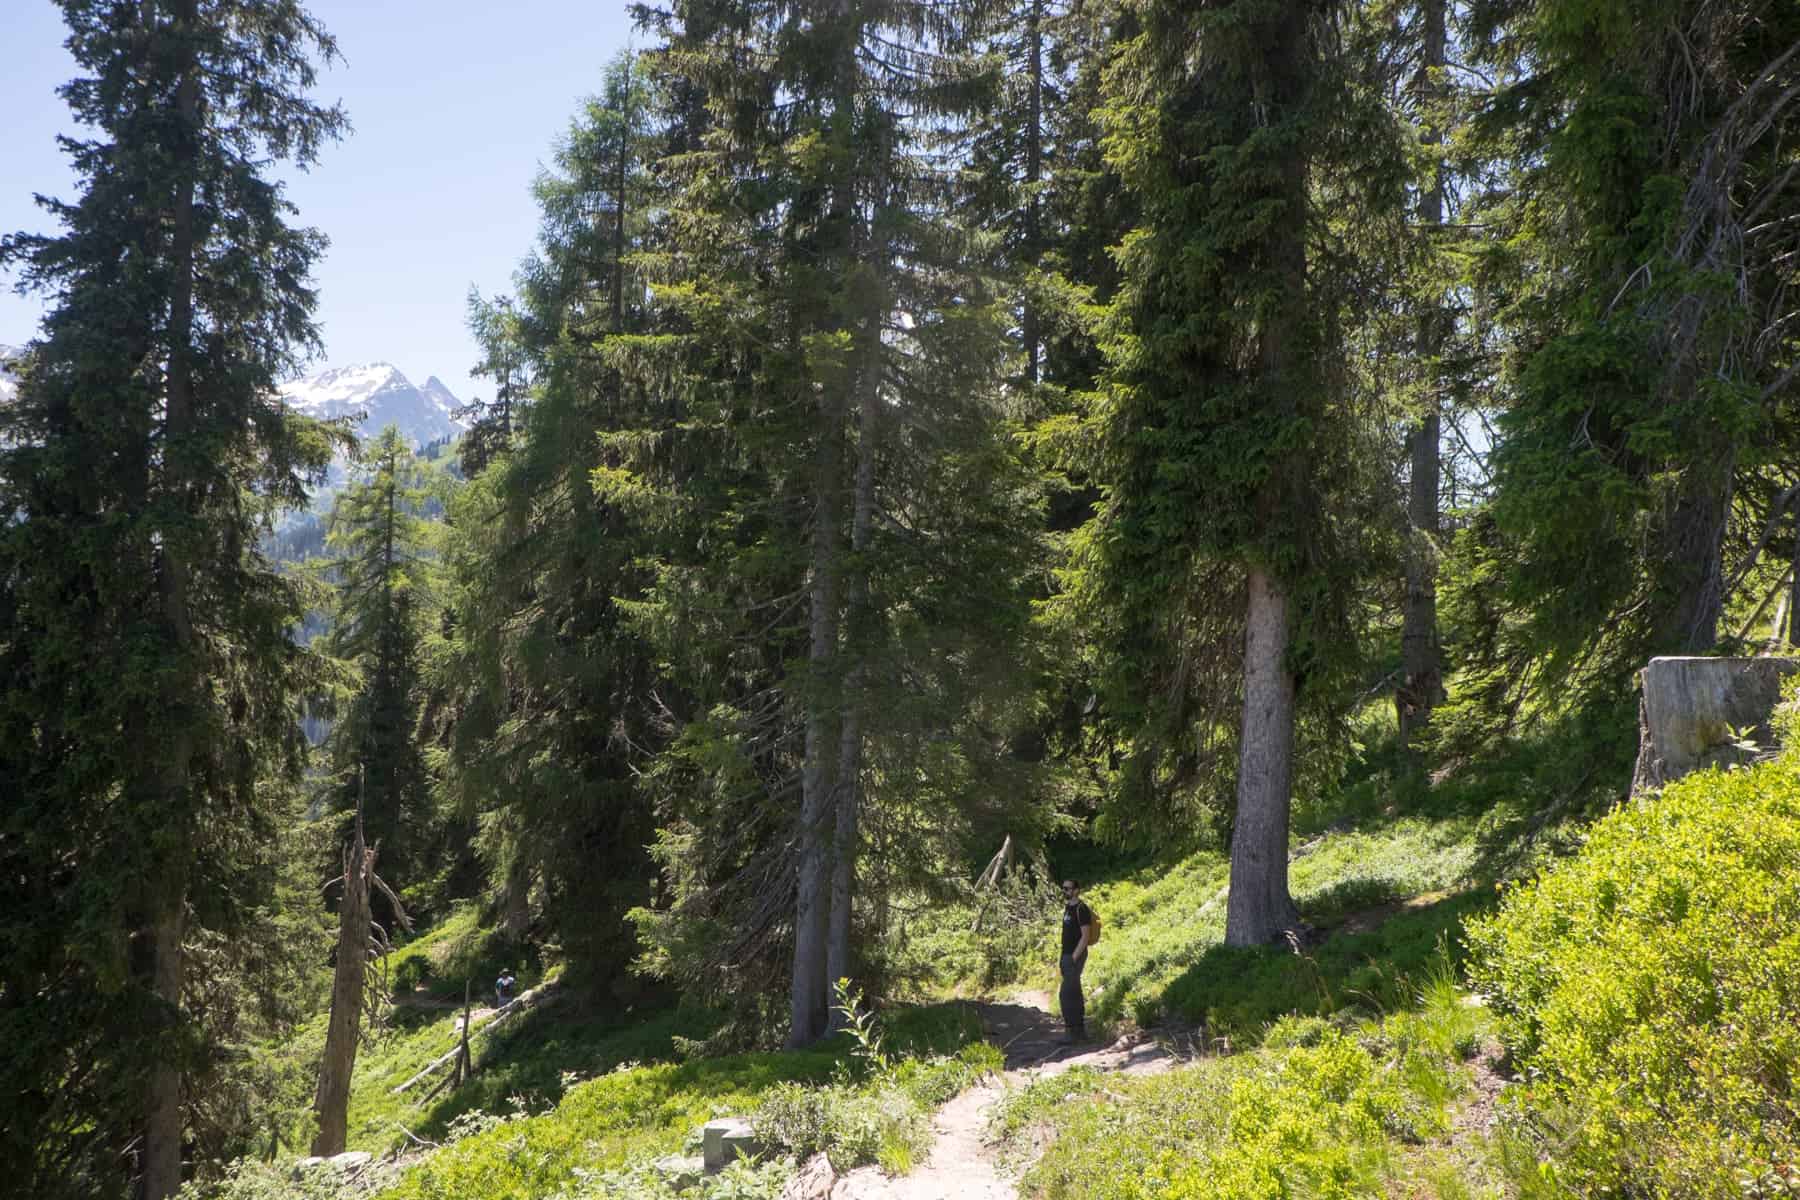 A man stands in a deep pocket of forest with thin, tall trees on a mountain in St. Anton in Austria